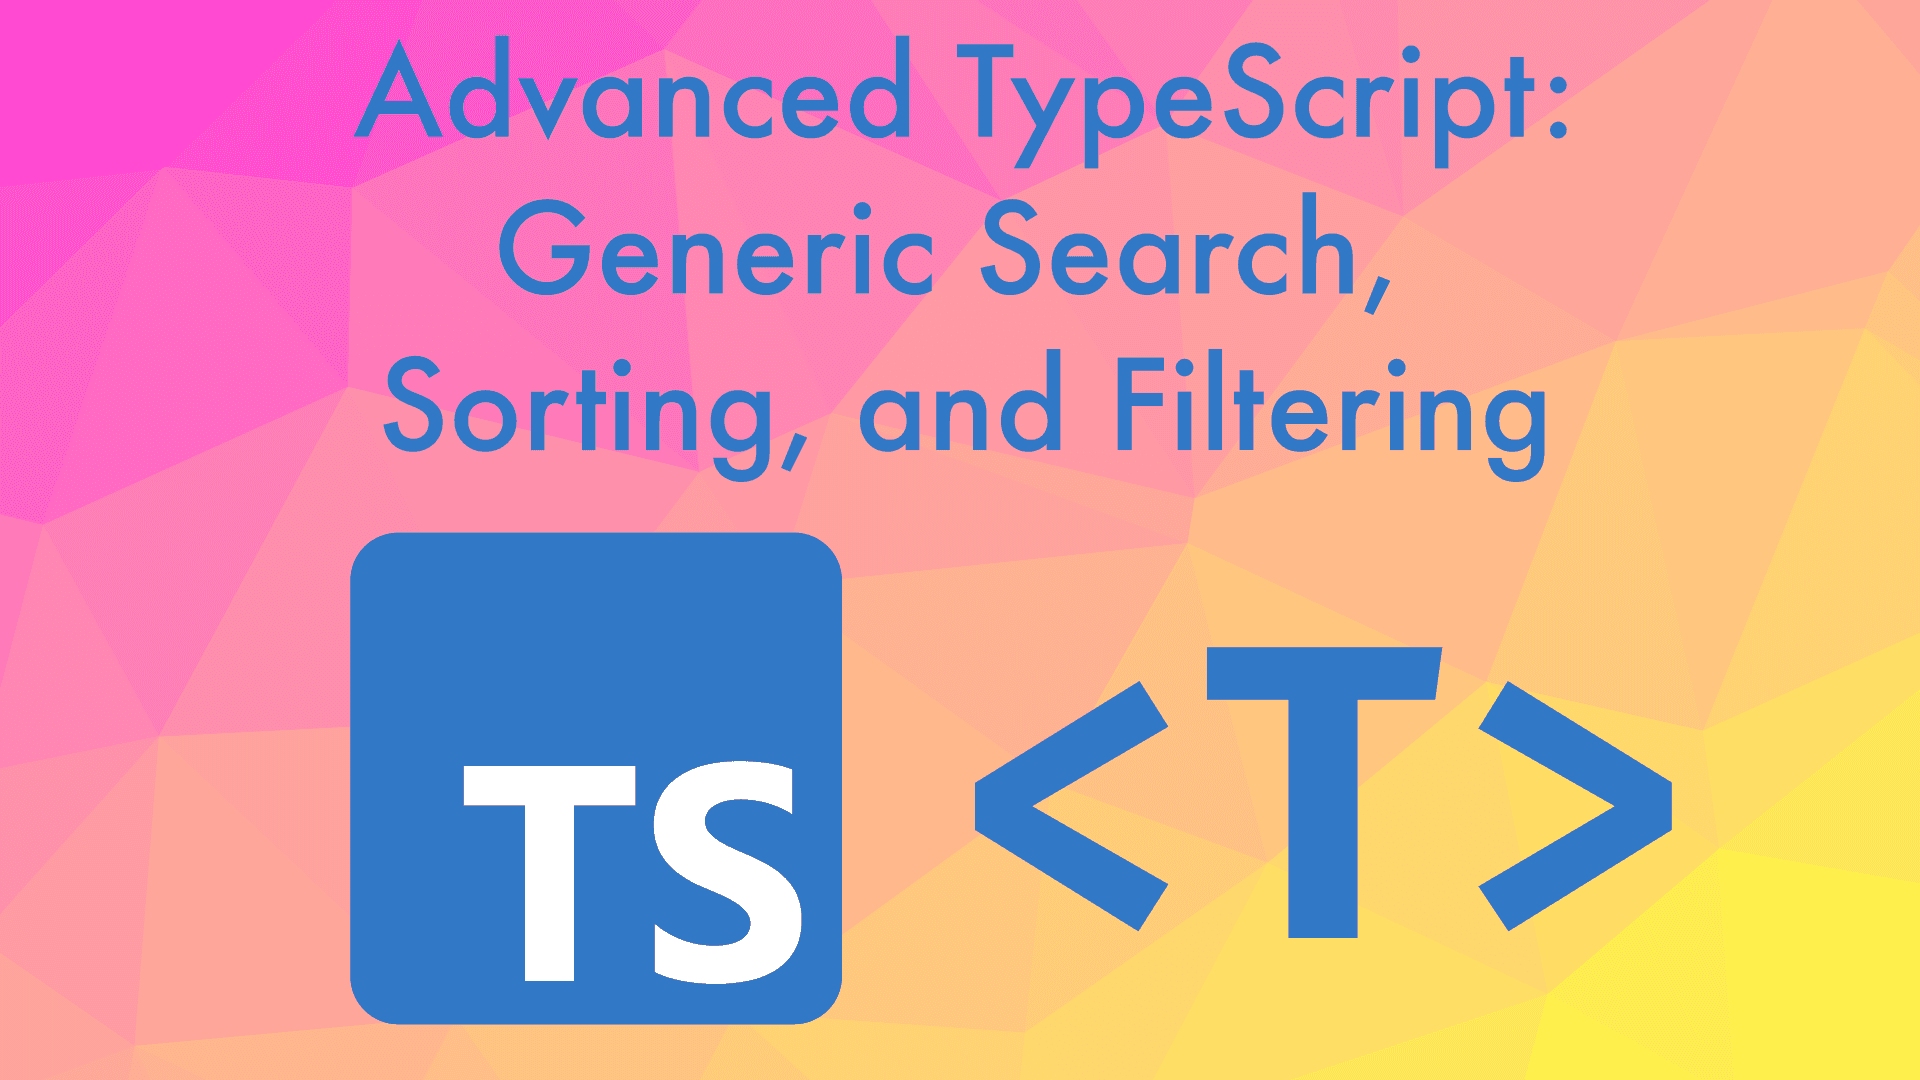 My Udemy course "Advanced TypeScript: Generic Search, Sorting, and Filtering".